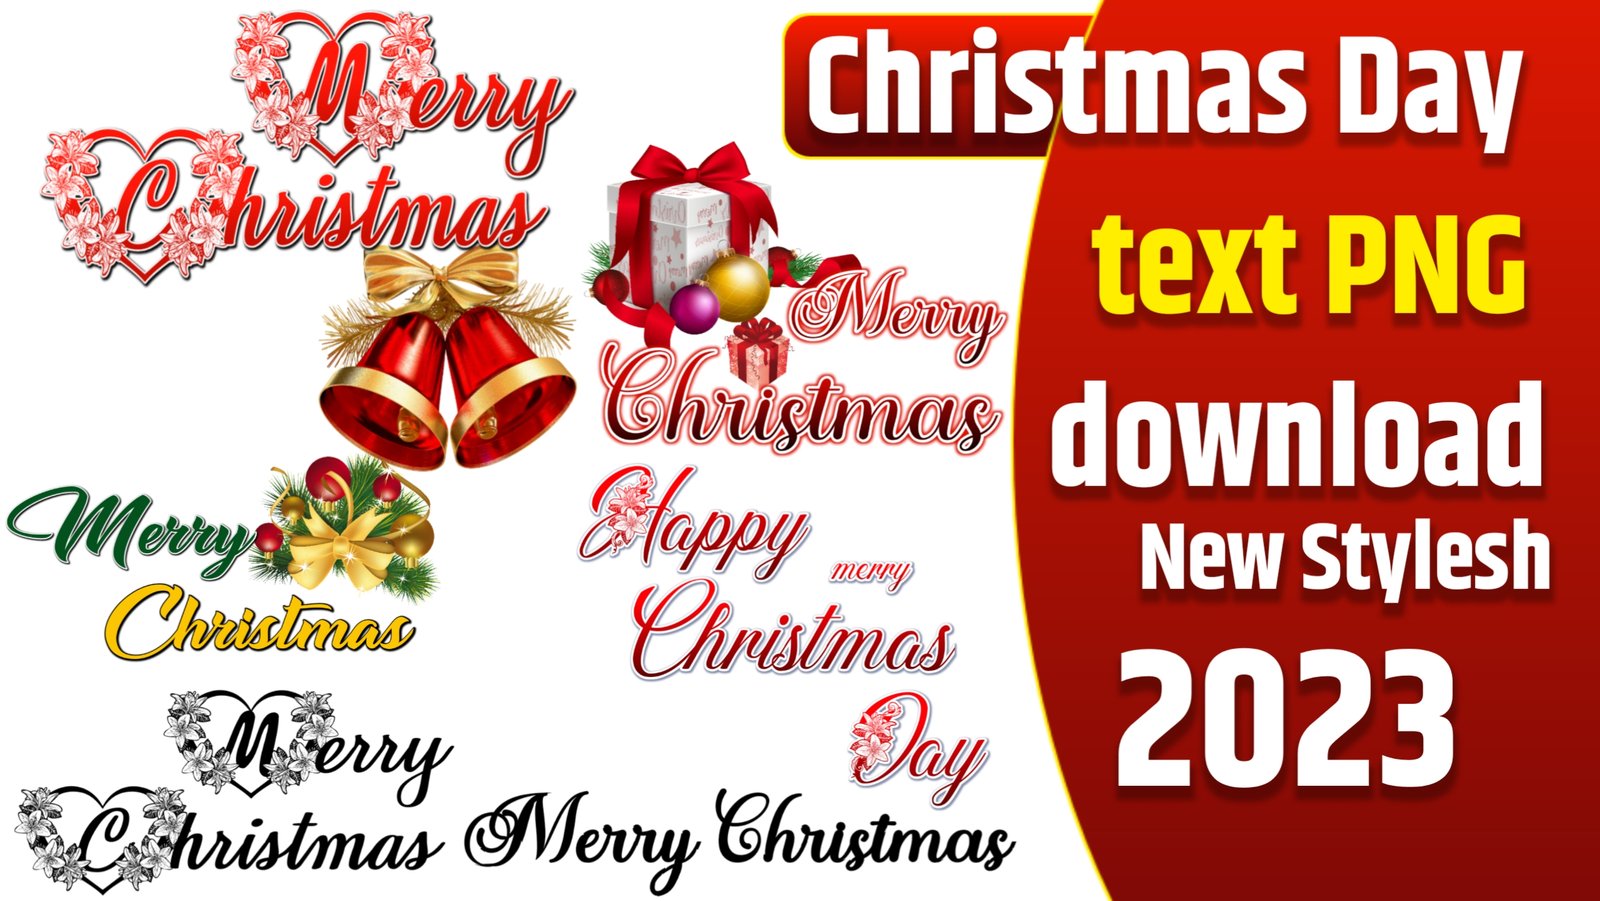 Merry Christmas text PNG|merry Christmas Vector text png|merry Christmas 2023 PNG images|merry Christmas calligraphy text PNG| merry Christmas 25 dec PNG| stylish merry Christmas text PNG|